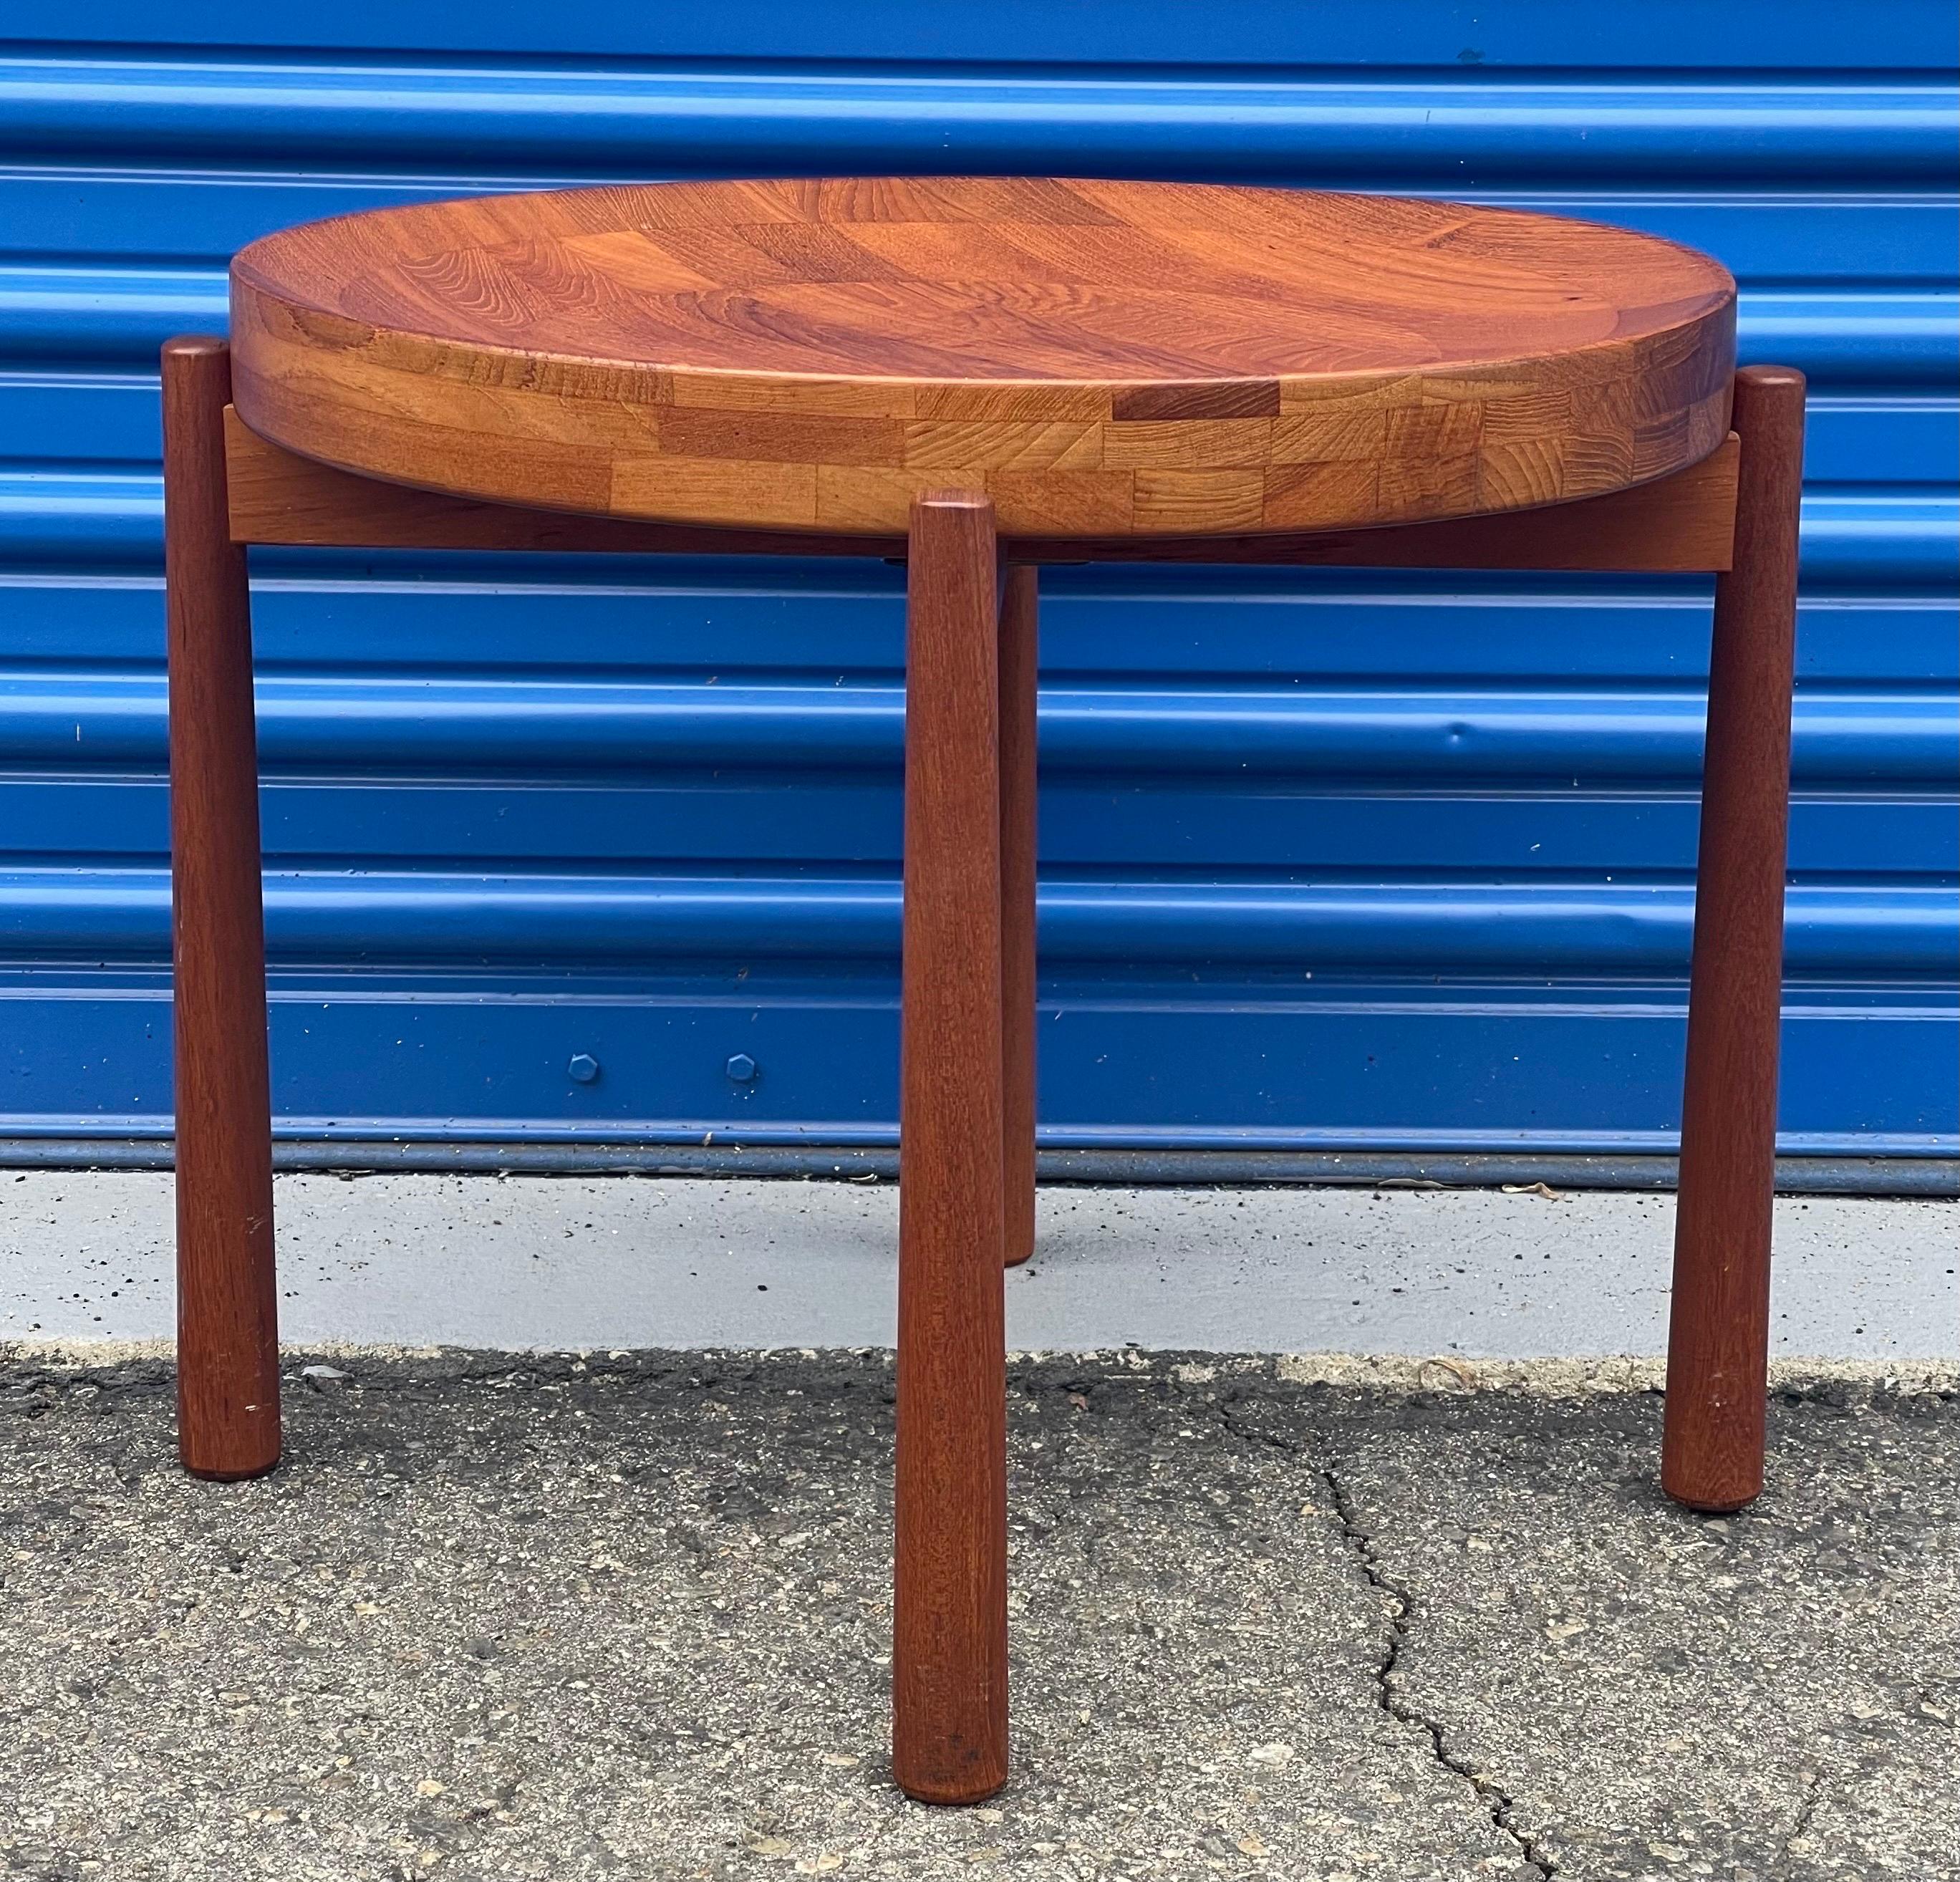 Pair of Teak Tray Side Tables Attributed to Jens Quistgaard for DUX of Sweden For Sale 7